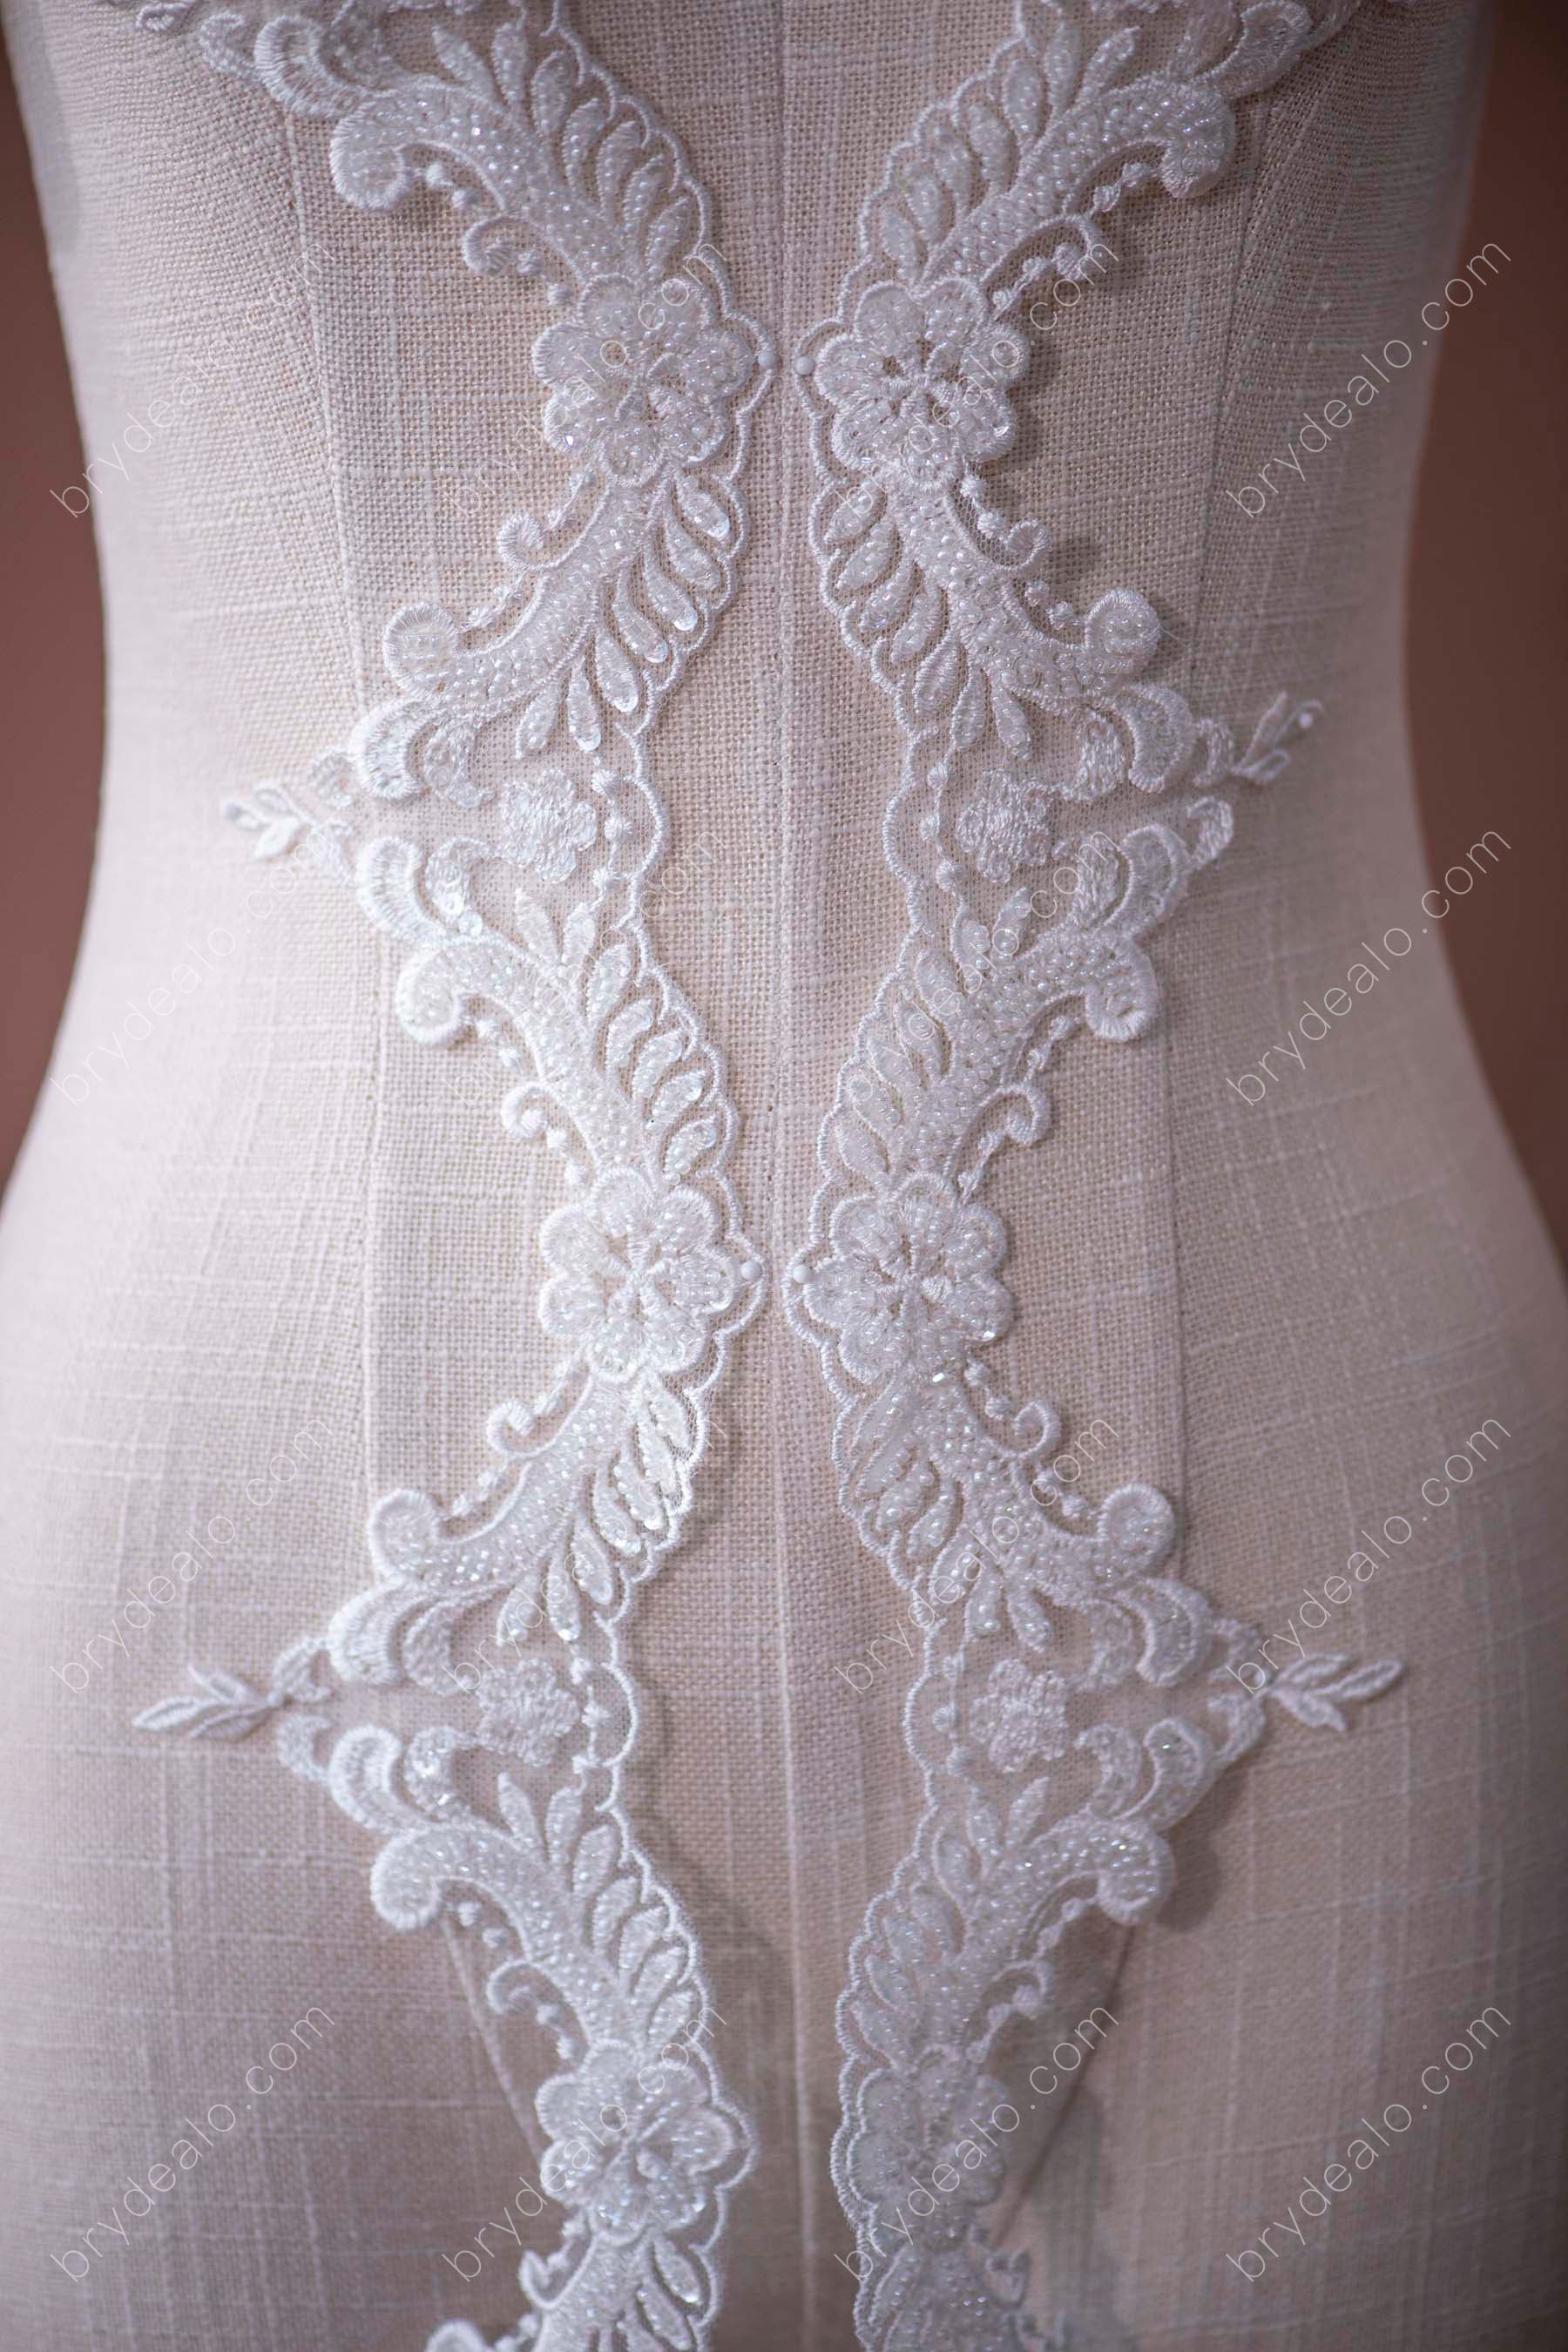 Shimmery Beaded Lace Trim